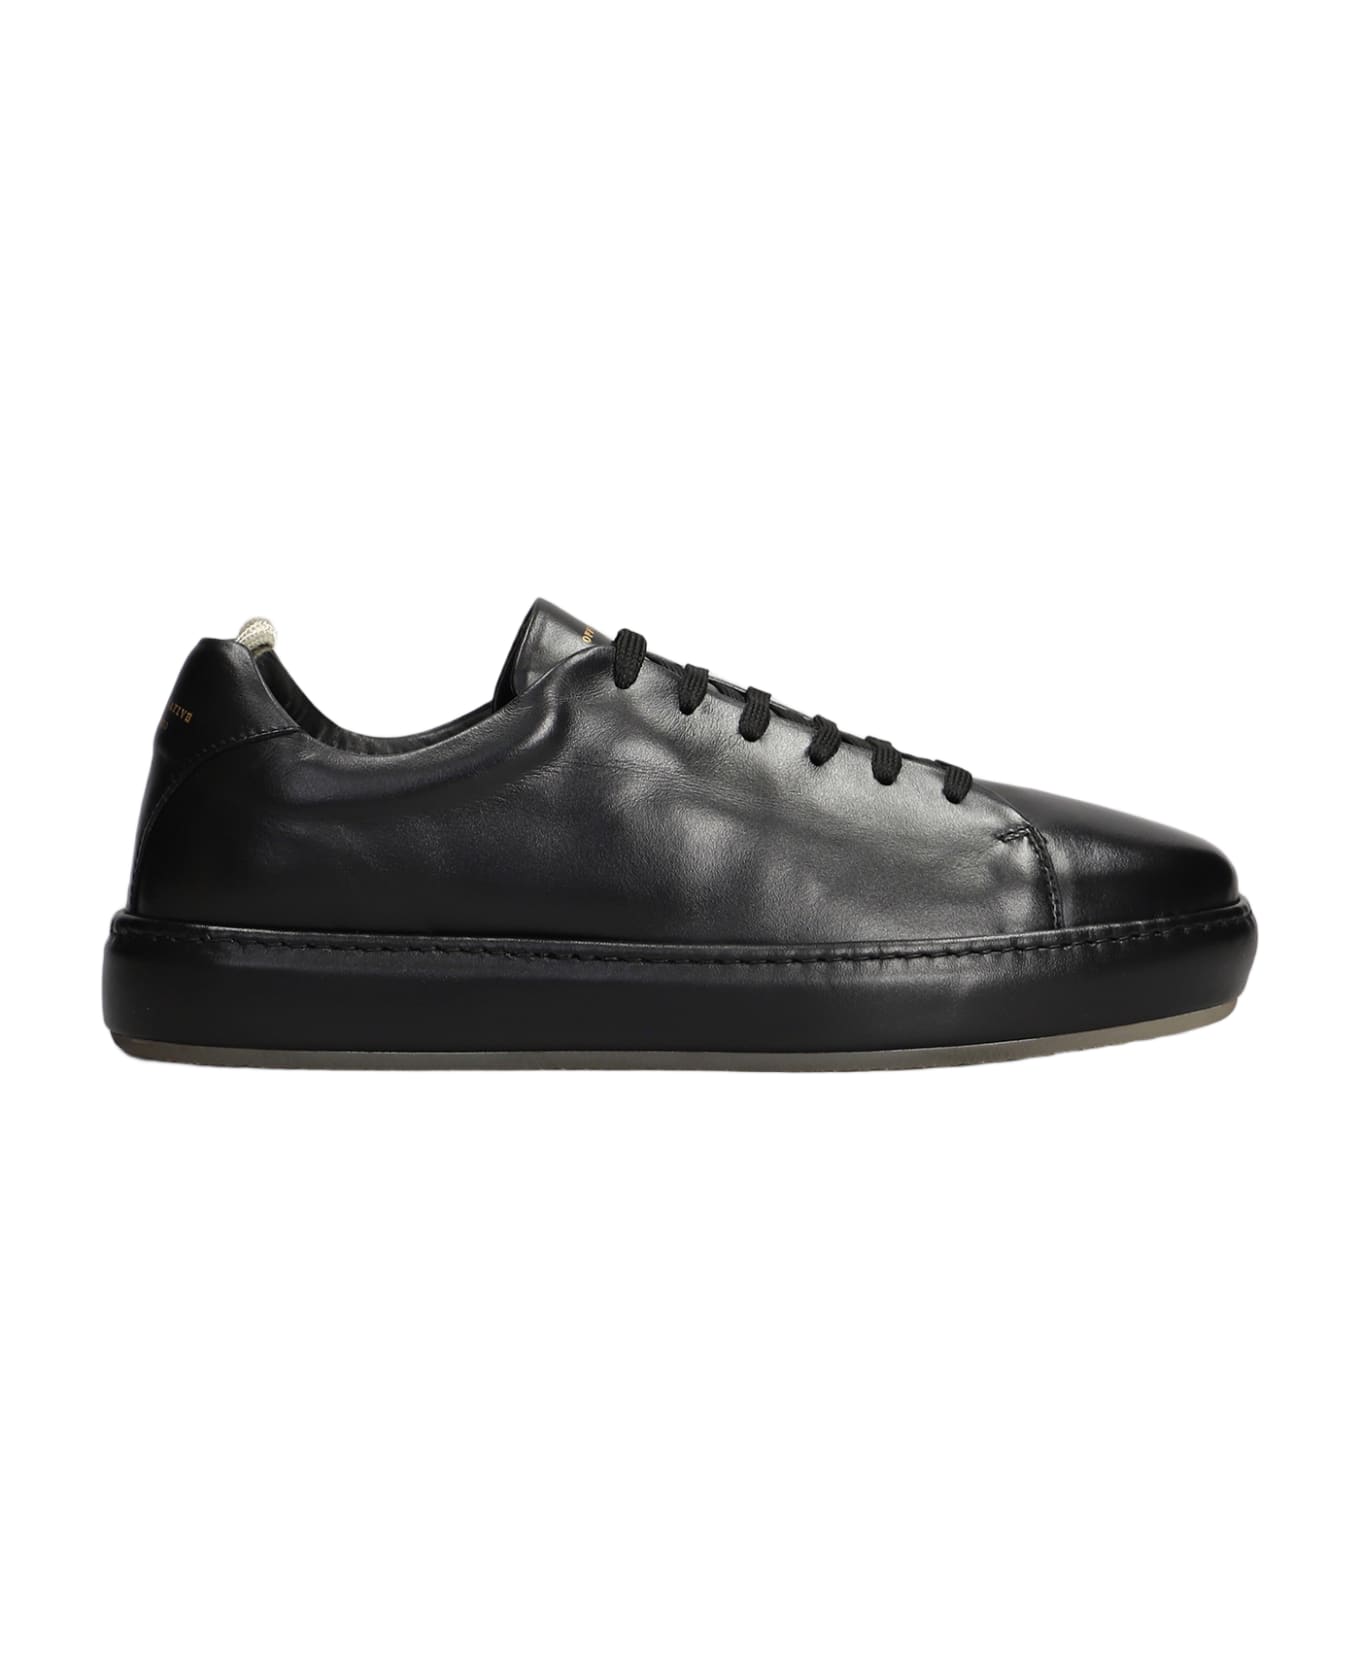 Officine Creative Covered 001 Sneakers In Black Leather - black スニーカー